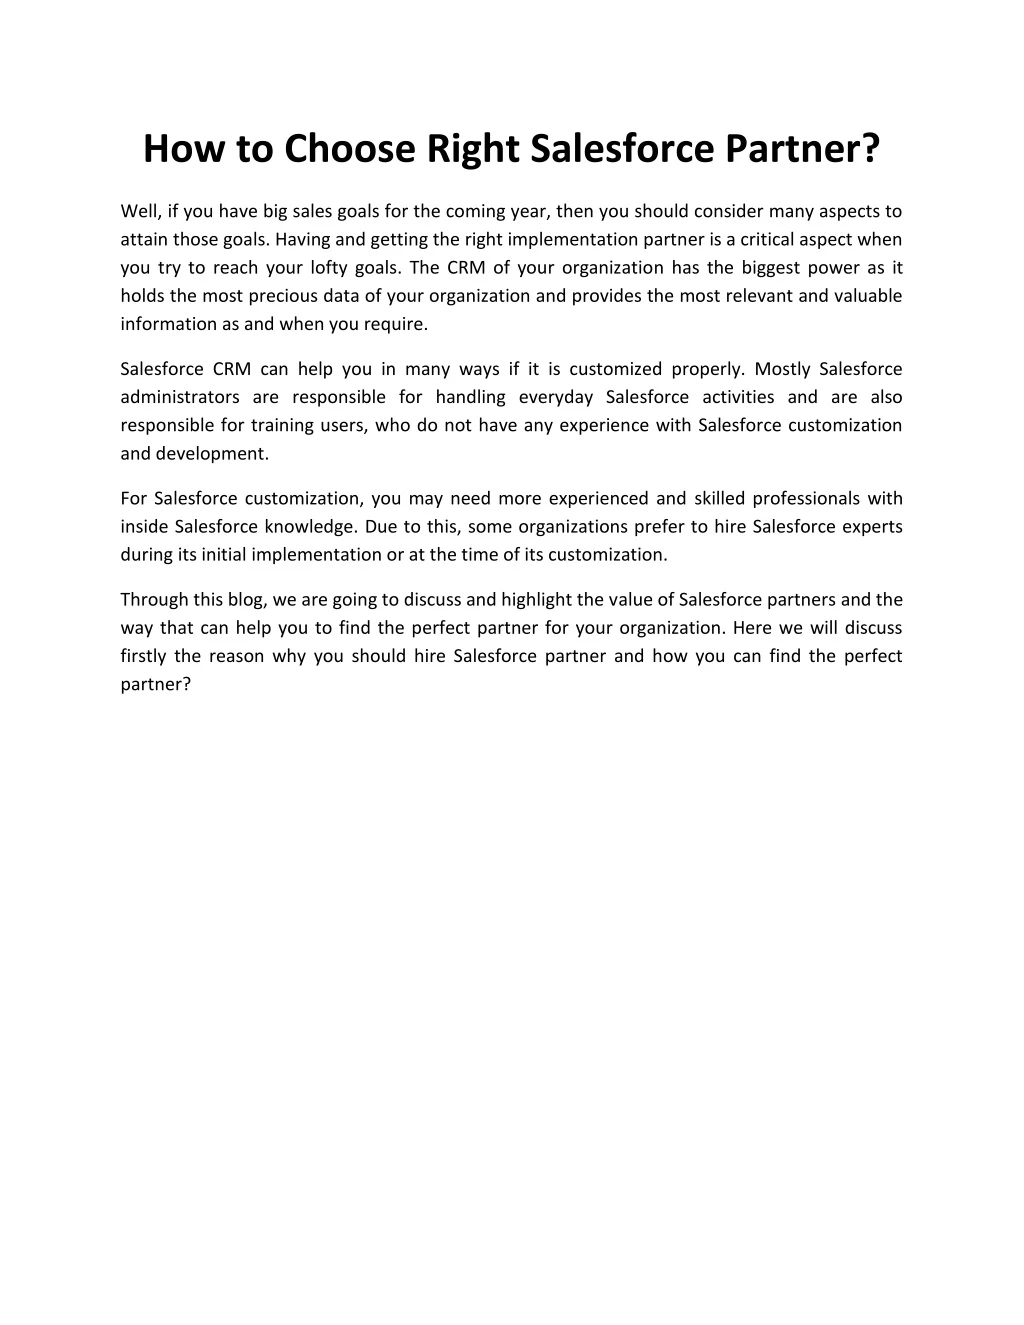 how to choose right salesforce partner